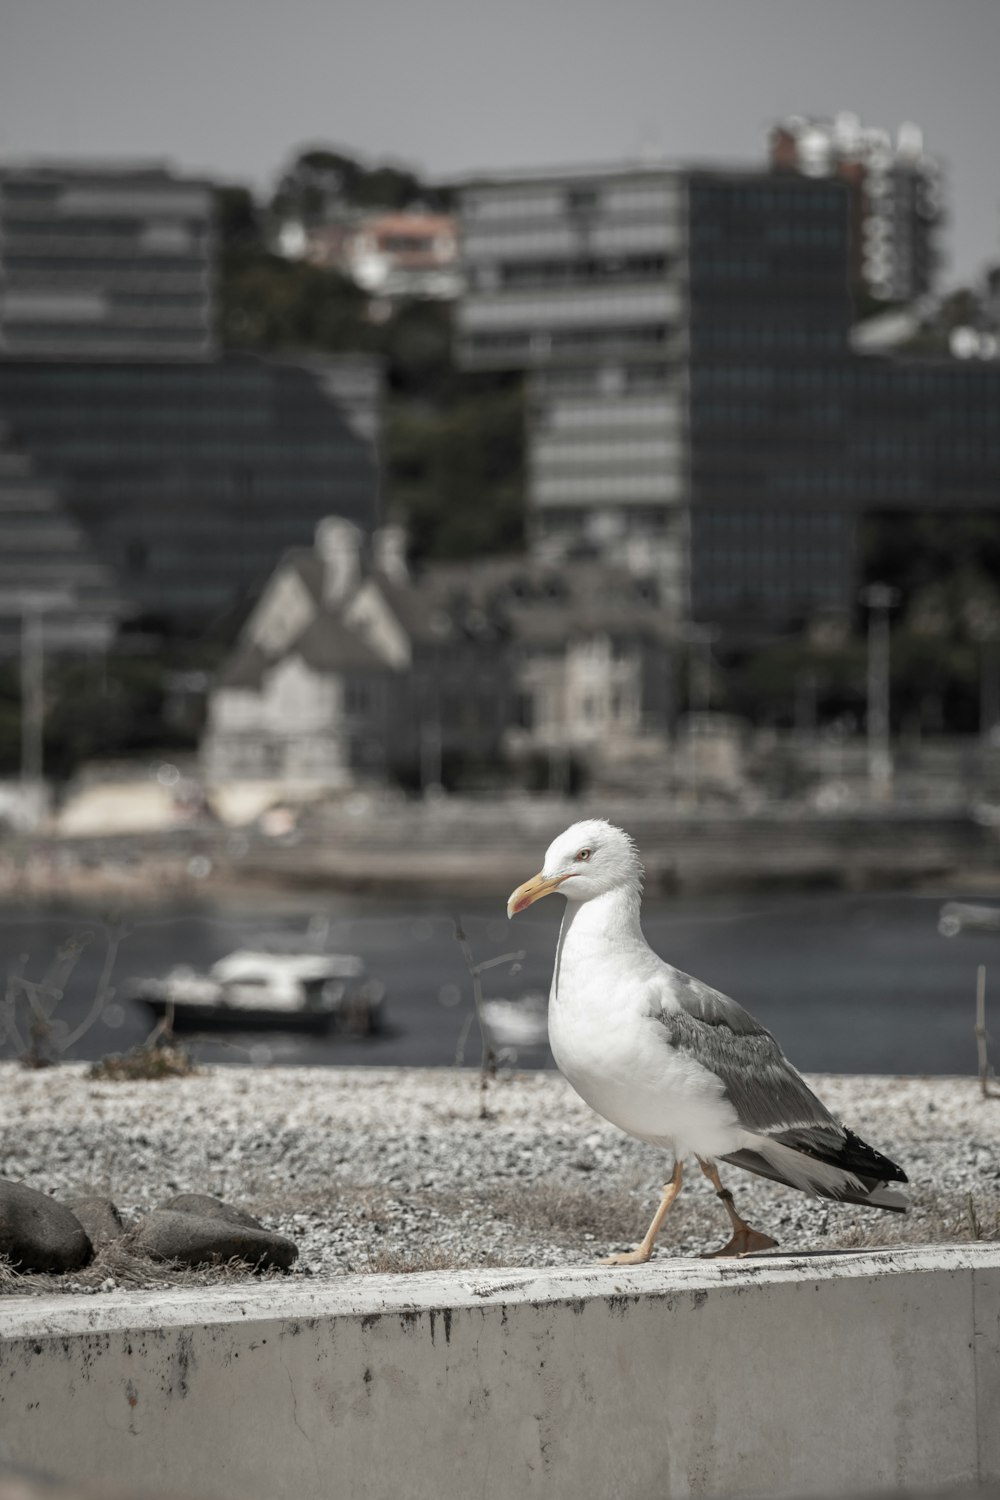 a seagull is standing on a ledge near a body of water